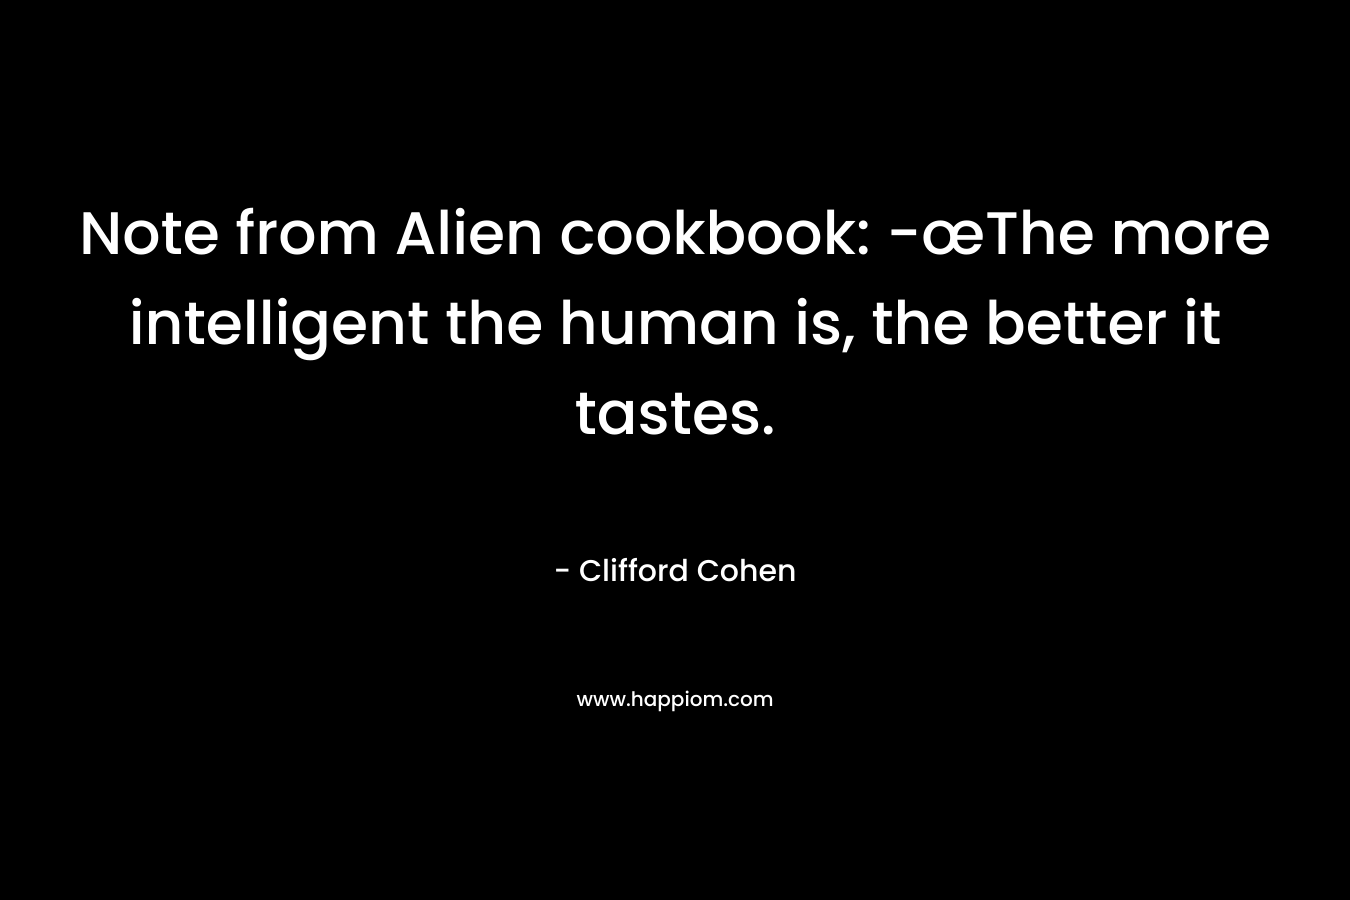 Note from Alien cookbook: -œThe more intelligent the human is, the better it tastes. – Clifford Cohen